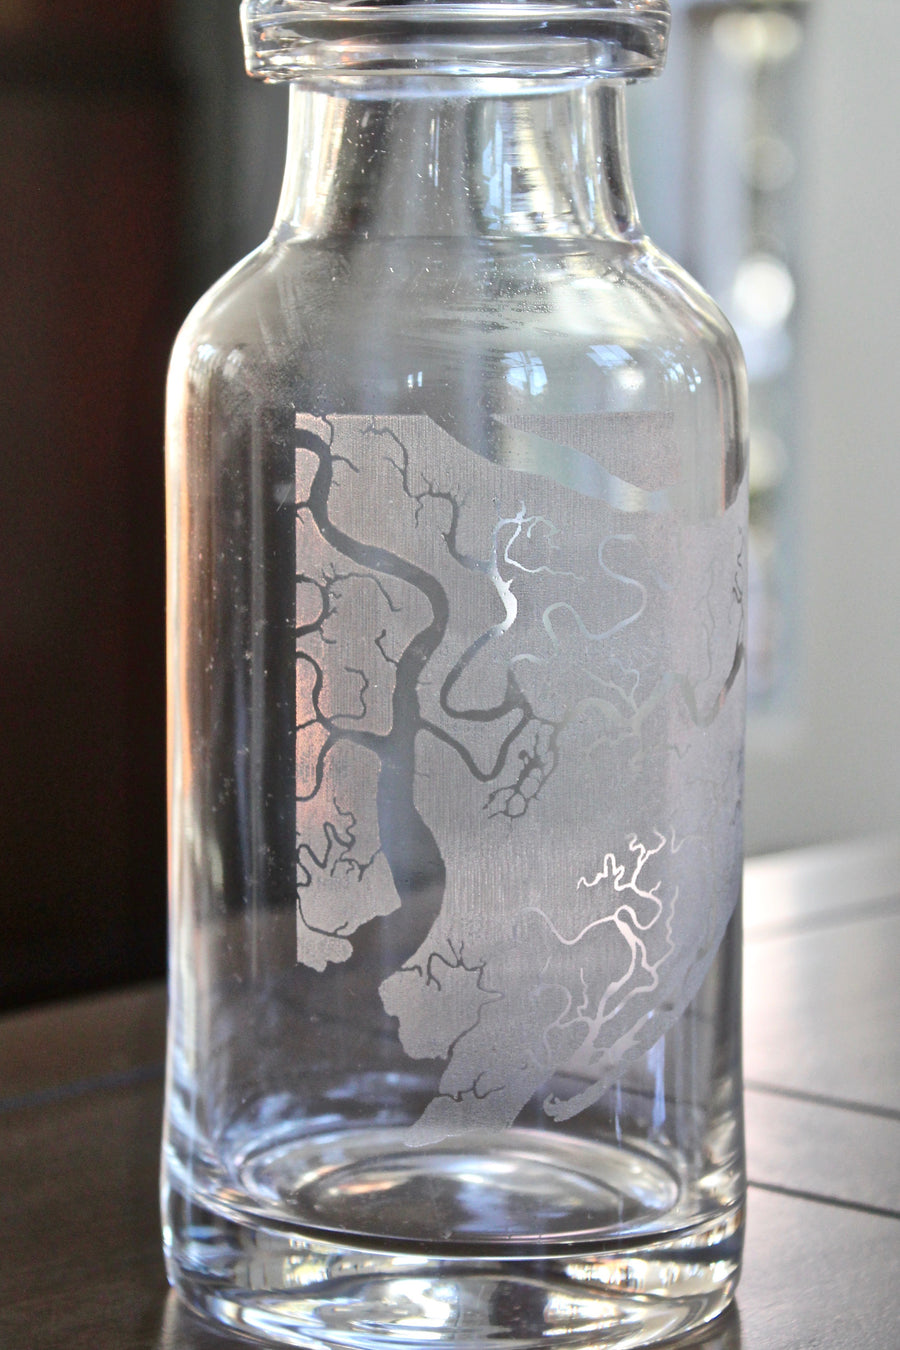 Tybee Island Engraved Glass Carafe